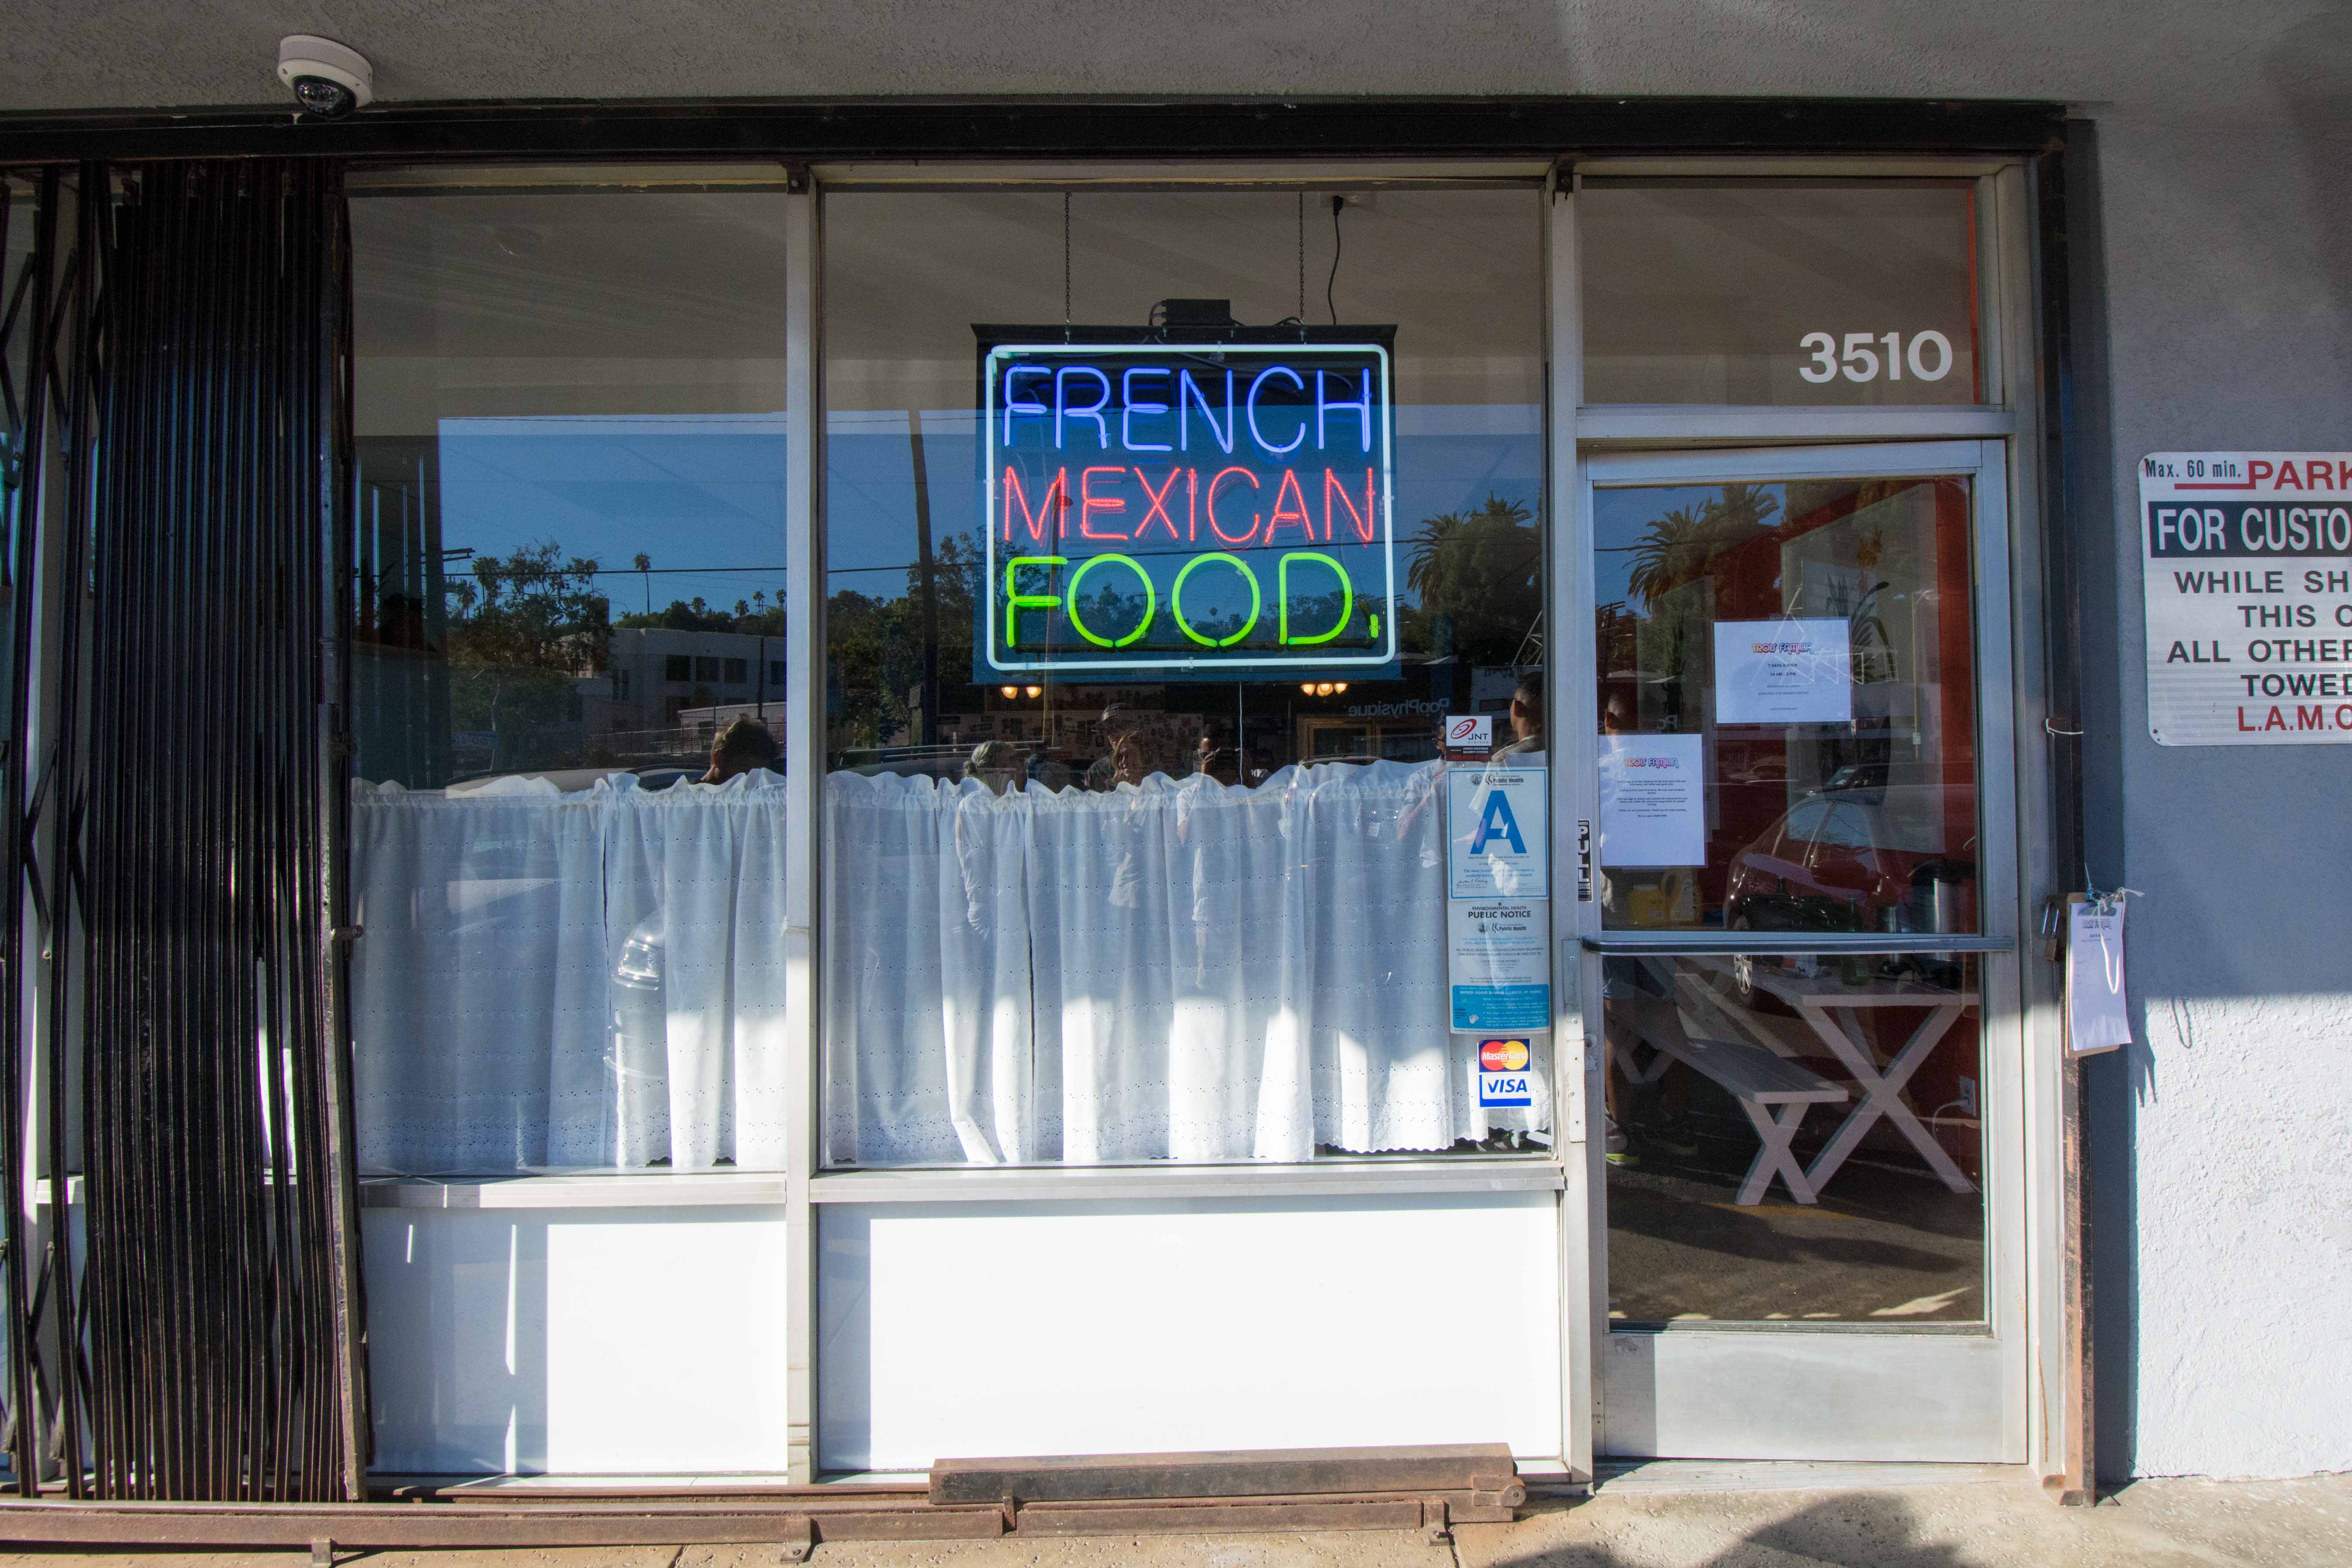 The "French Mexican Food" sign is by artist Patrick Martinez